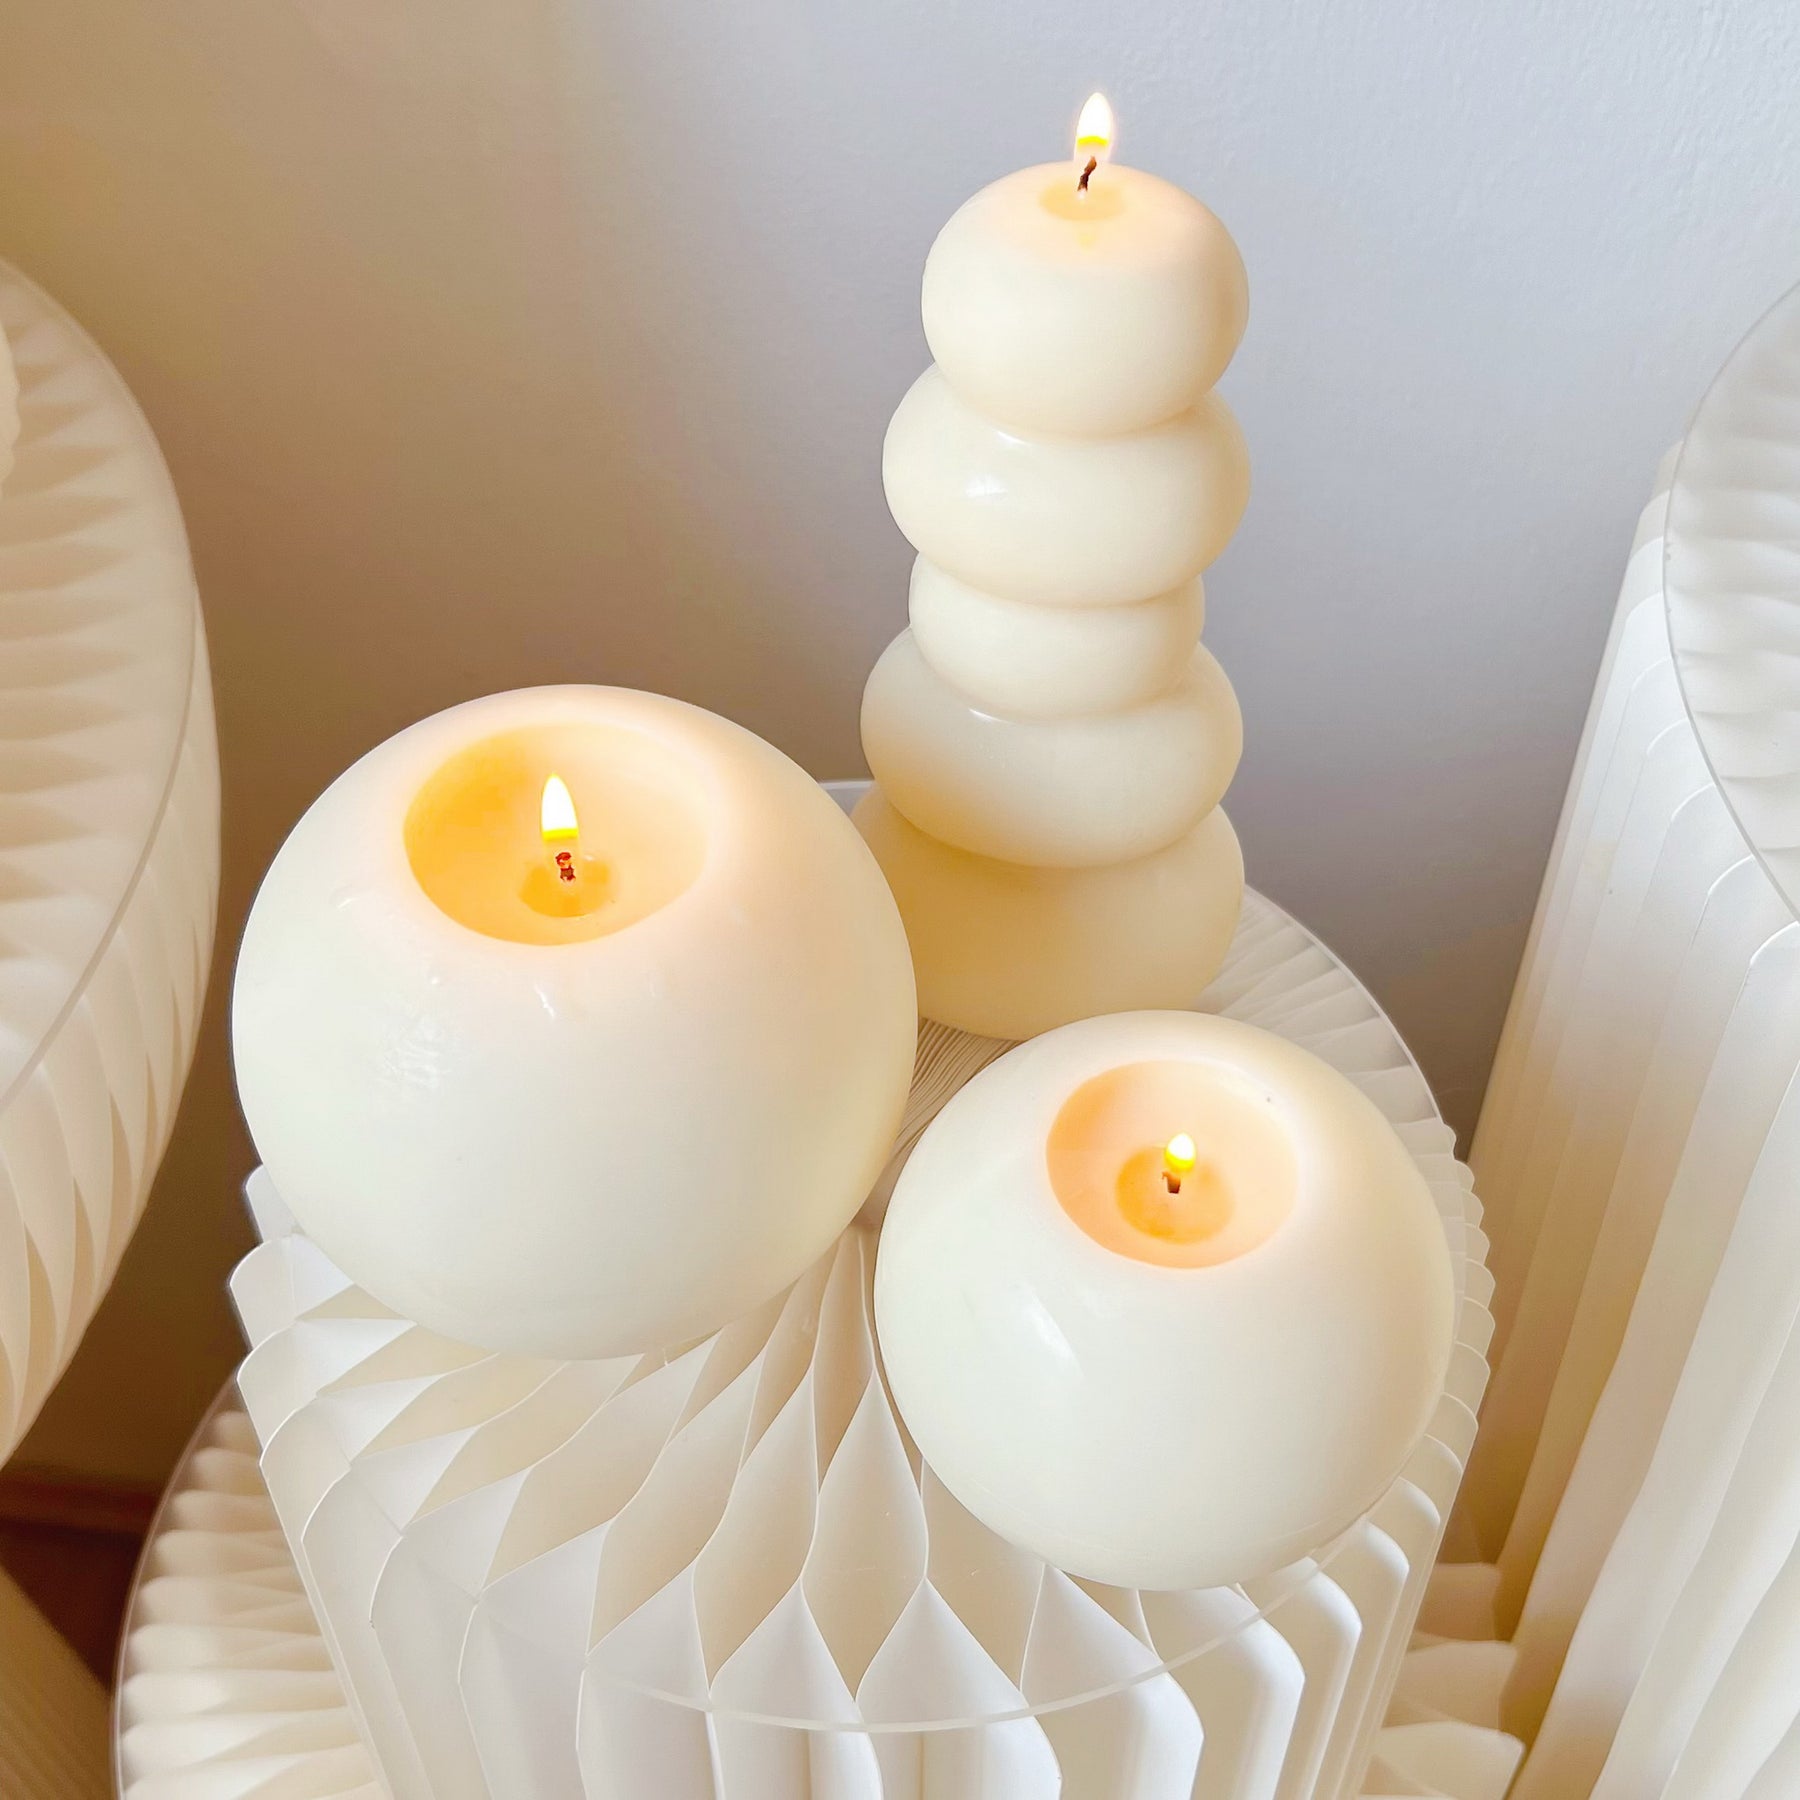 Dreamy Scents & Thoughtful Gift - Pebble Pillar Candle | LMJ Candles